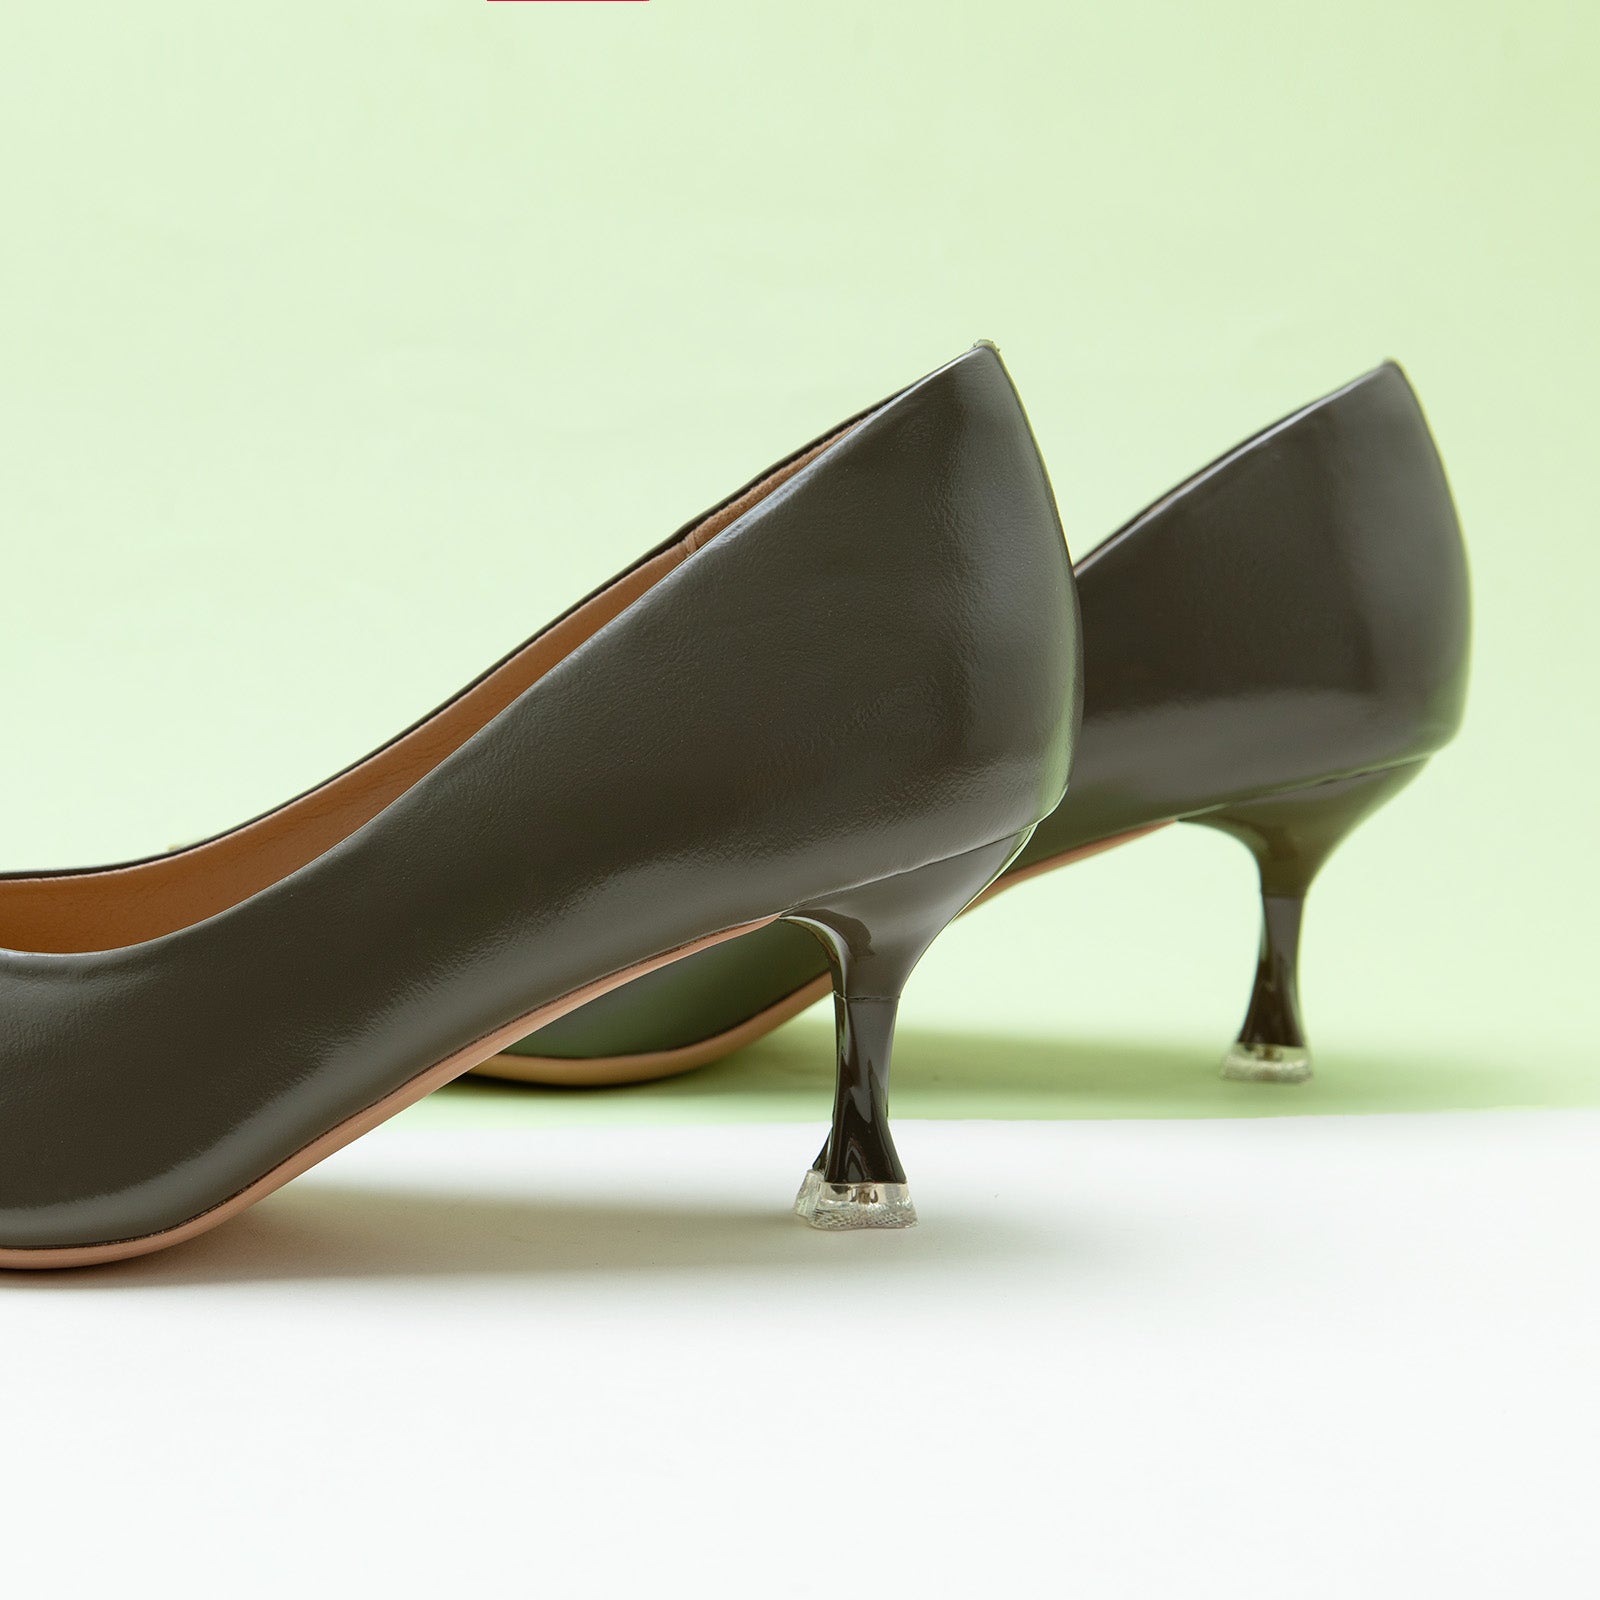 Geometric Grey Kitten Heel Pumps, featuring distinctive patterns for a modern and urban style.